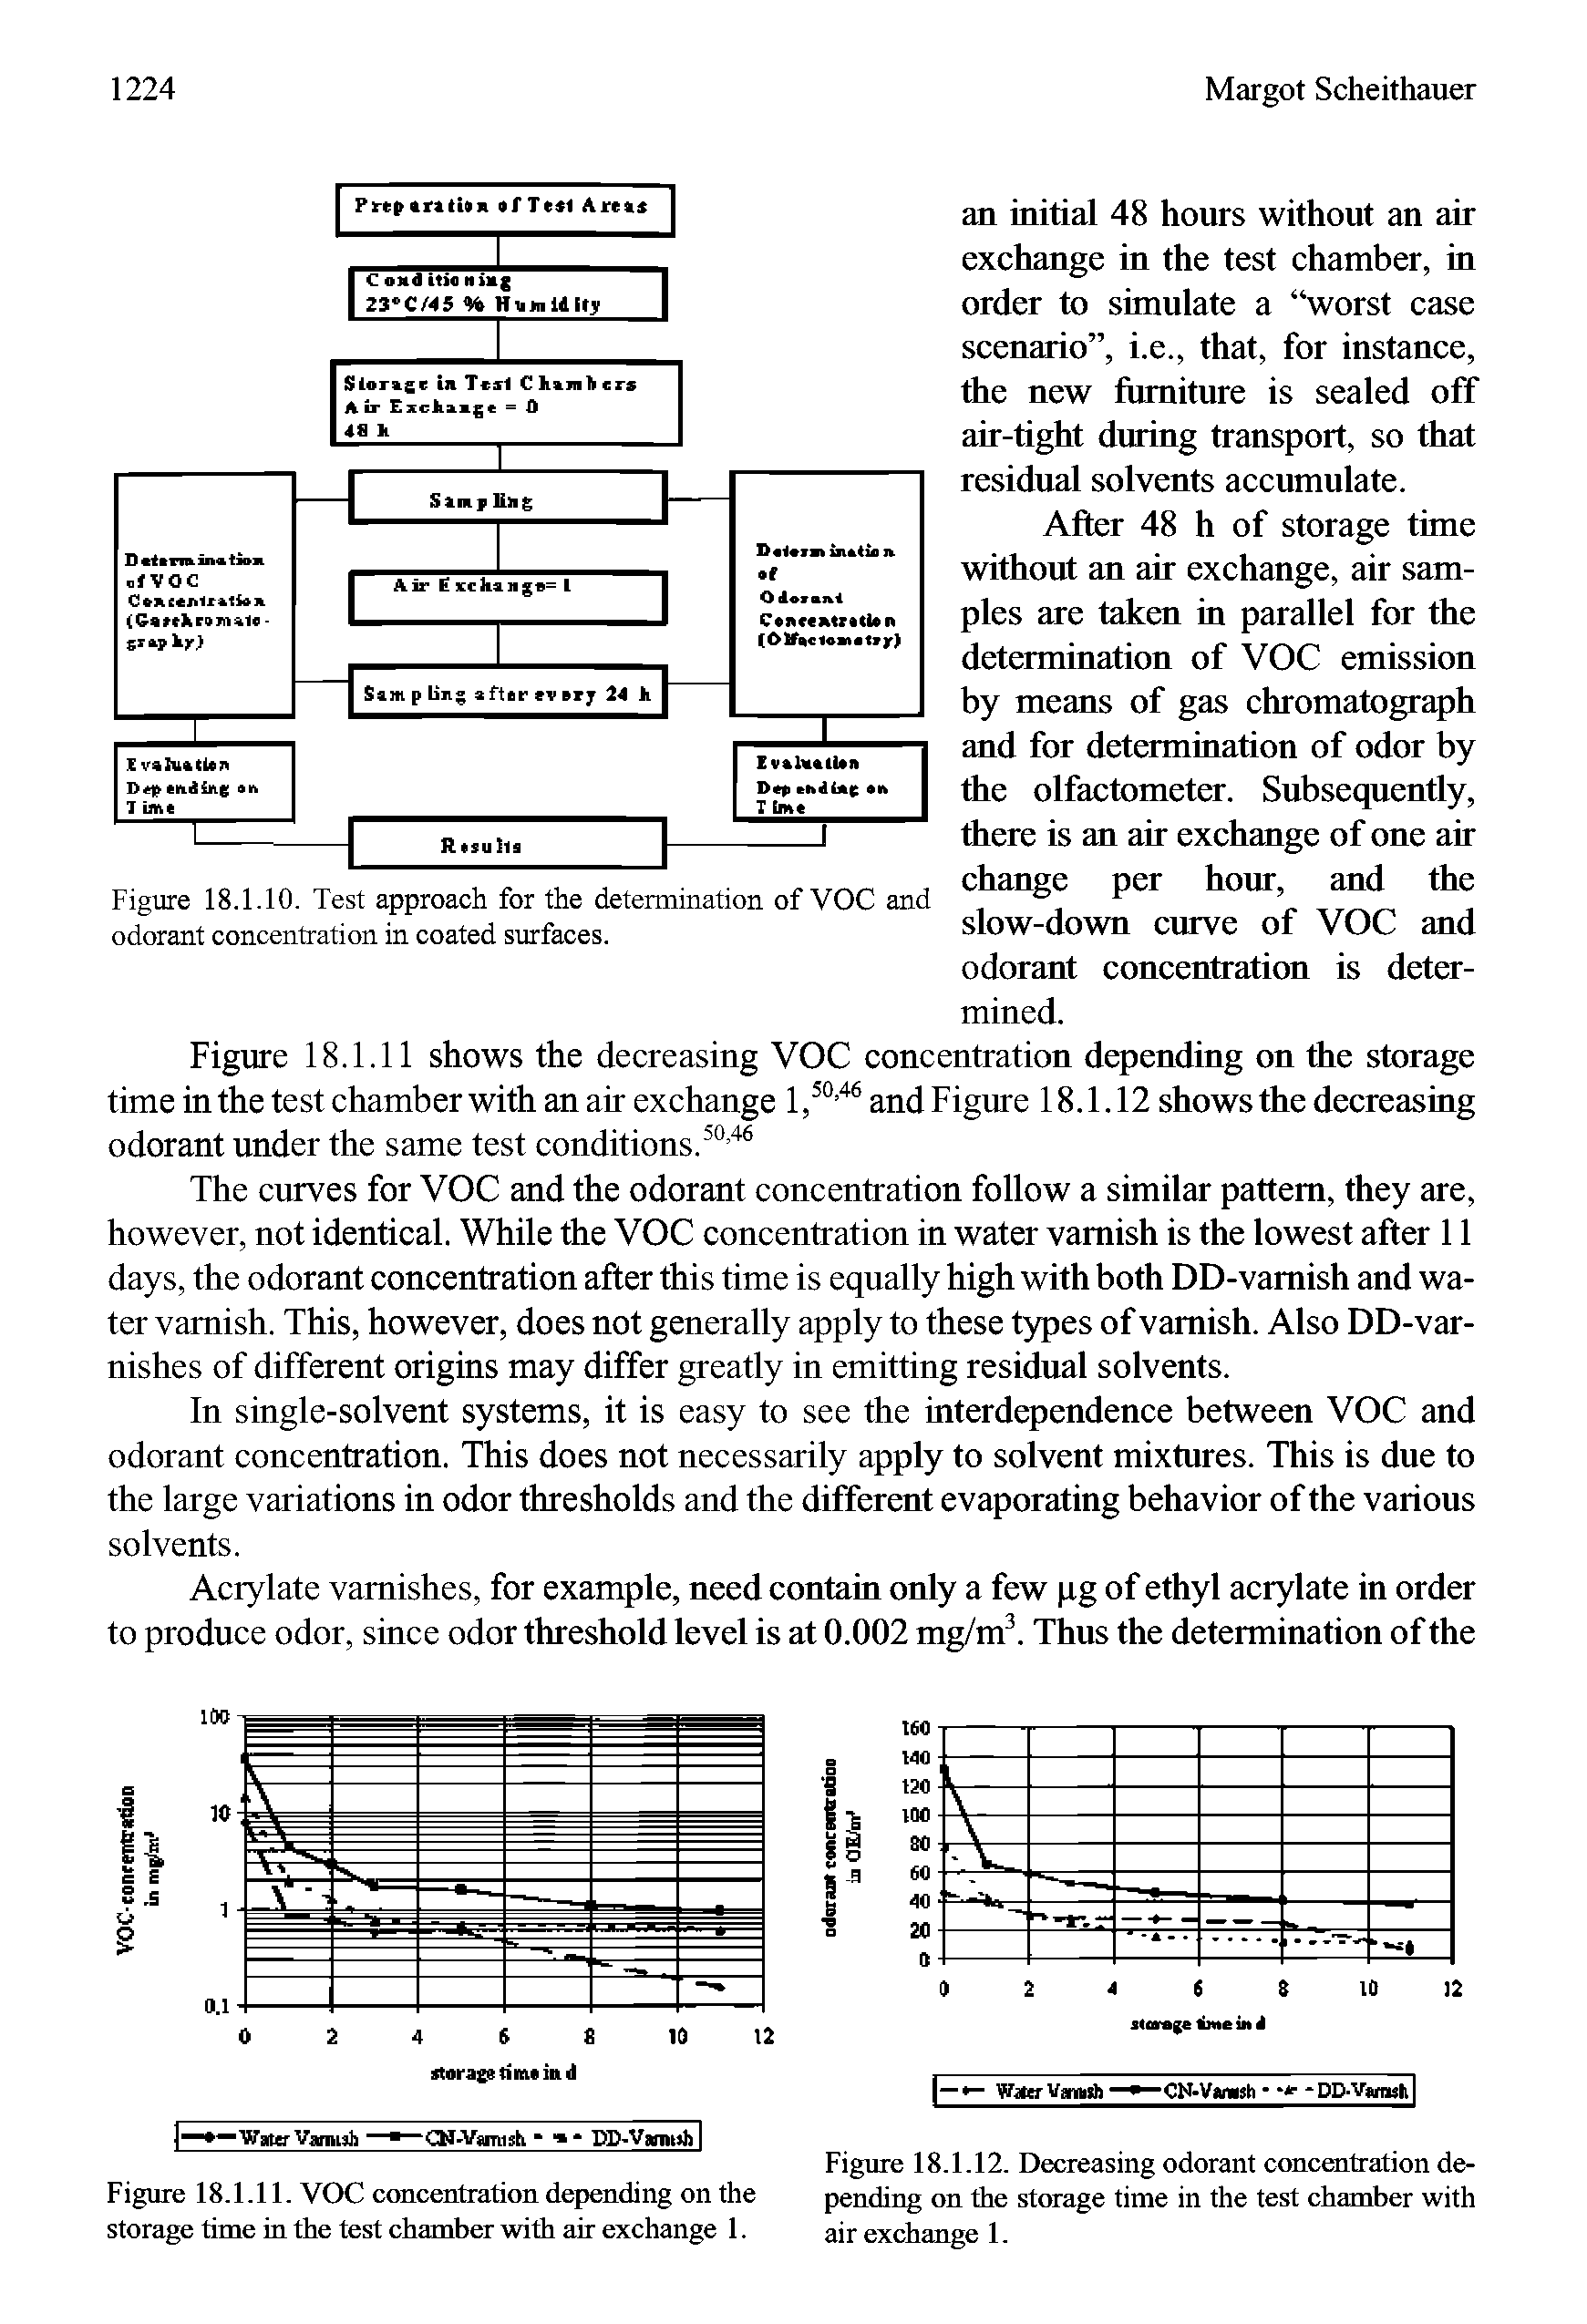 Figure 18.1.10. Test approach for the determination of VOC and odorant concentration in coated surfaces.